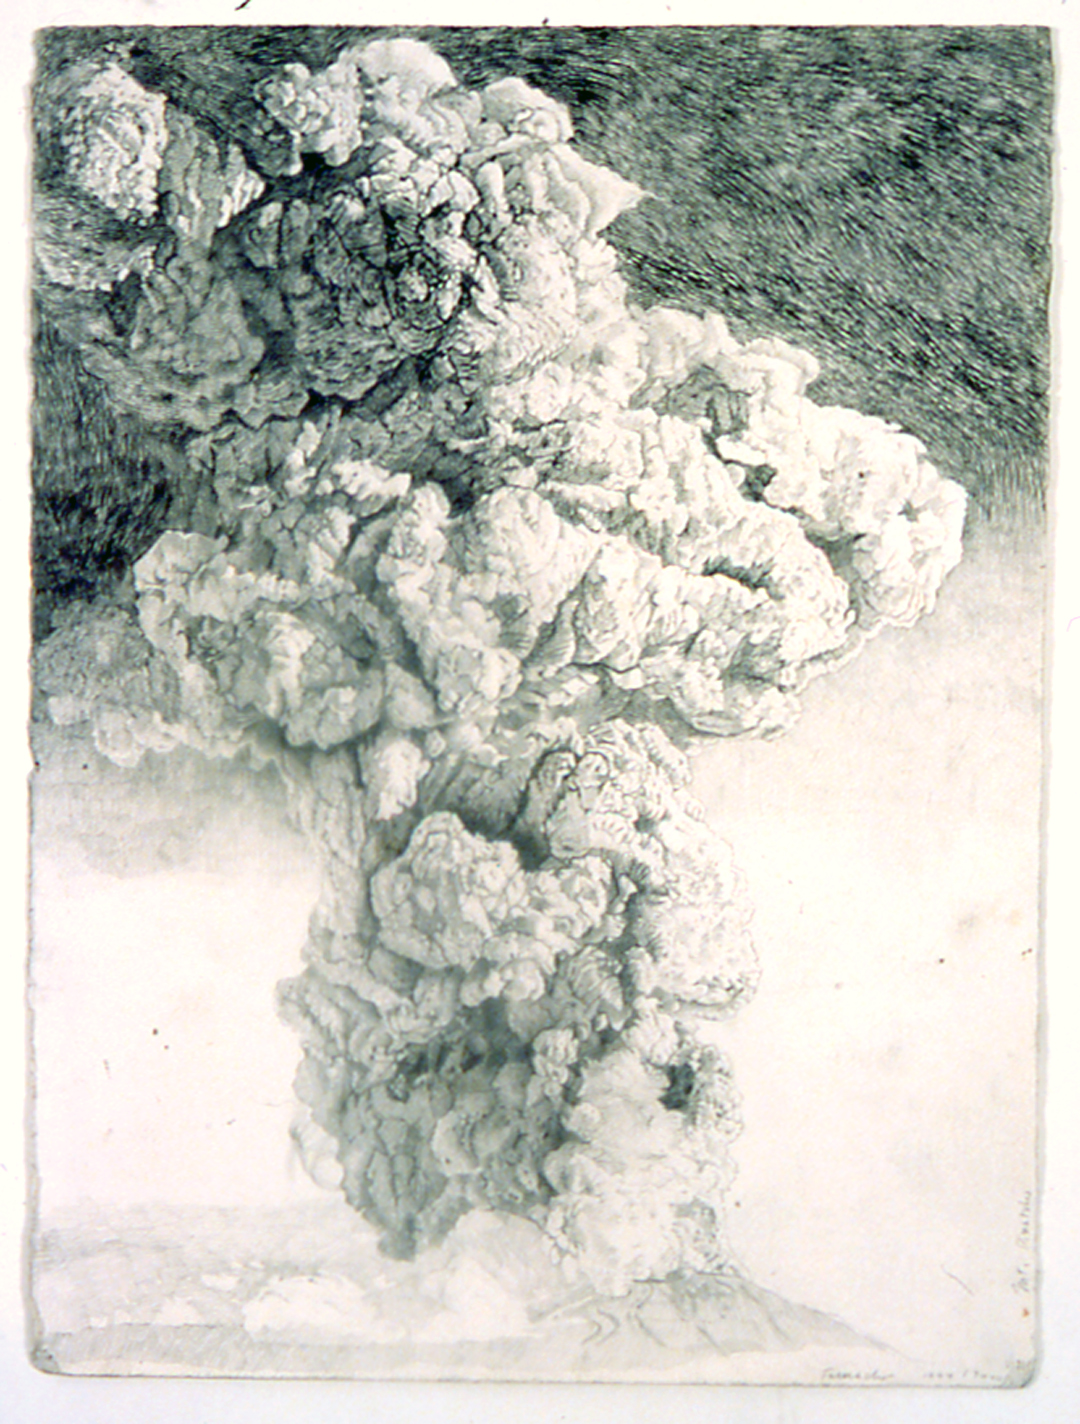 Mt. Pinatubo, 1999-2000, Graphite on Paper,  30 x 22 inches, Artist Collection